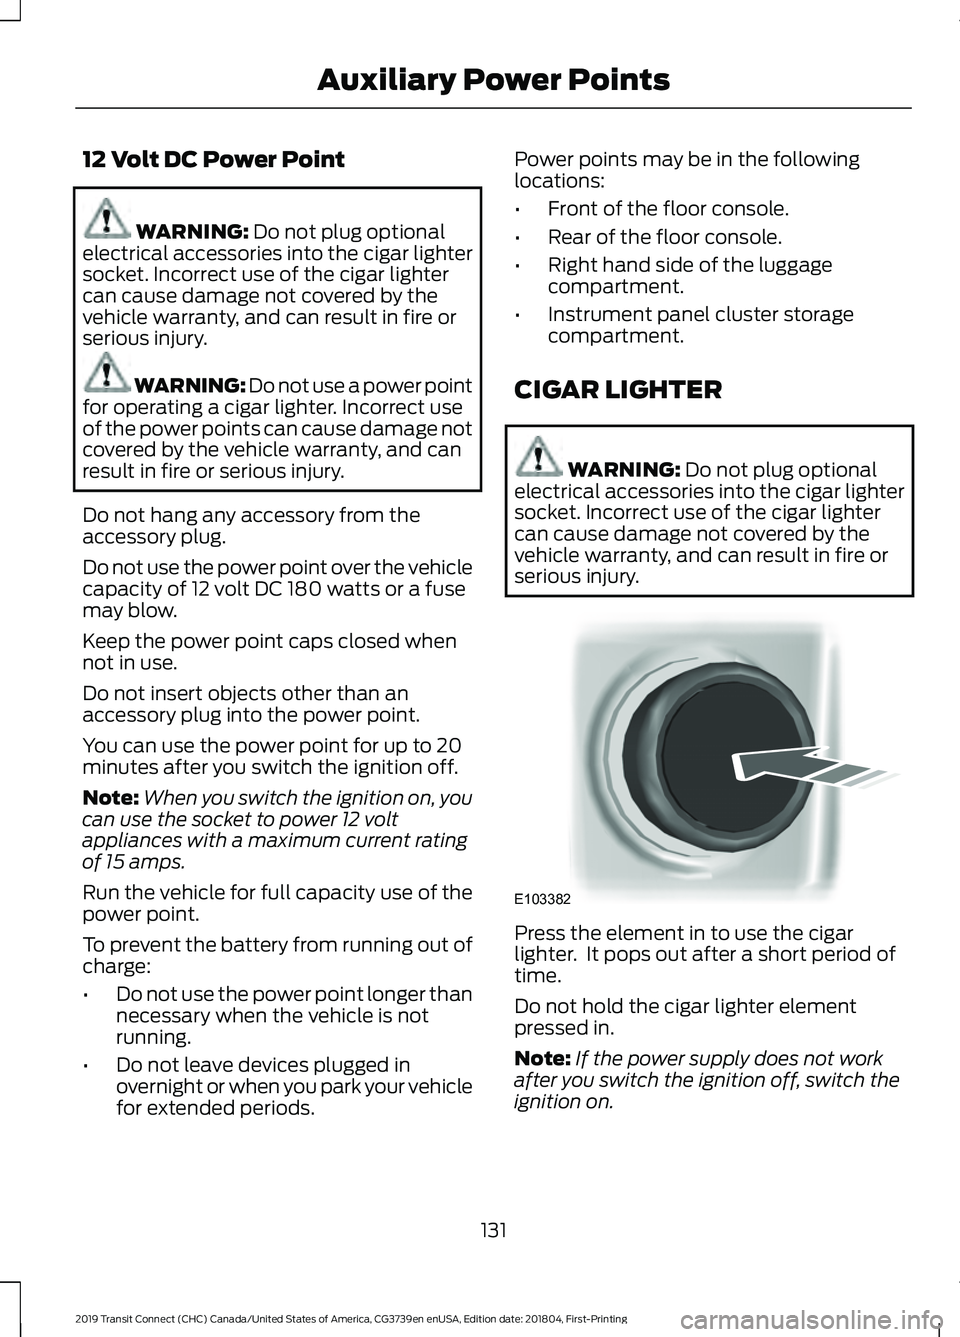 FORD TRANSIT CONNECT 2019  Owners Manual 12 Volt DC Power Point
WARNING: Do not plug optional
electrical accessories into the cigar lighter
socket. Incorrect use of the cigar lighter
can cause damage not covered by the
vehicle warranty, and 